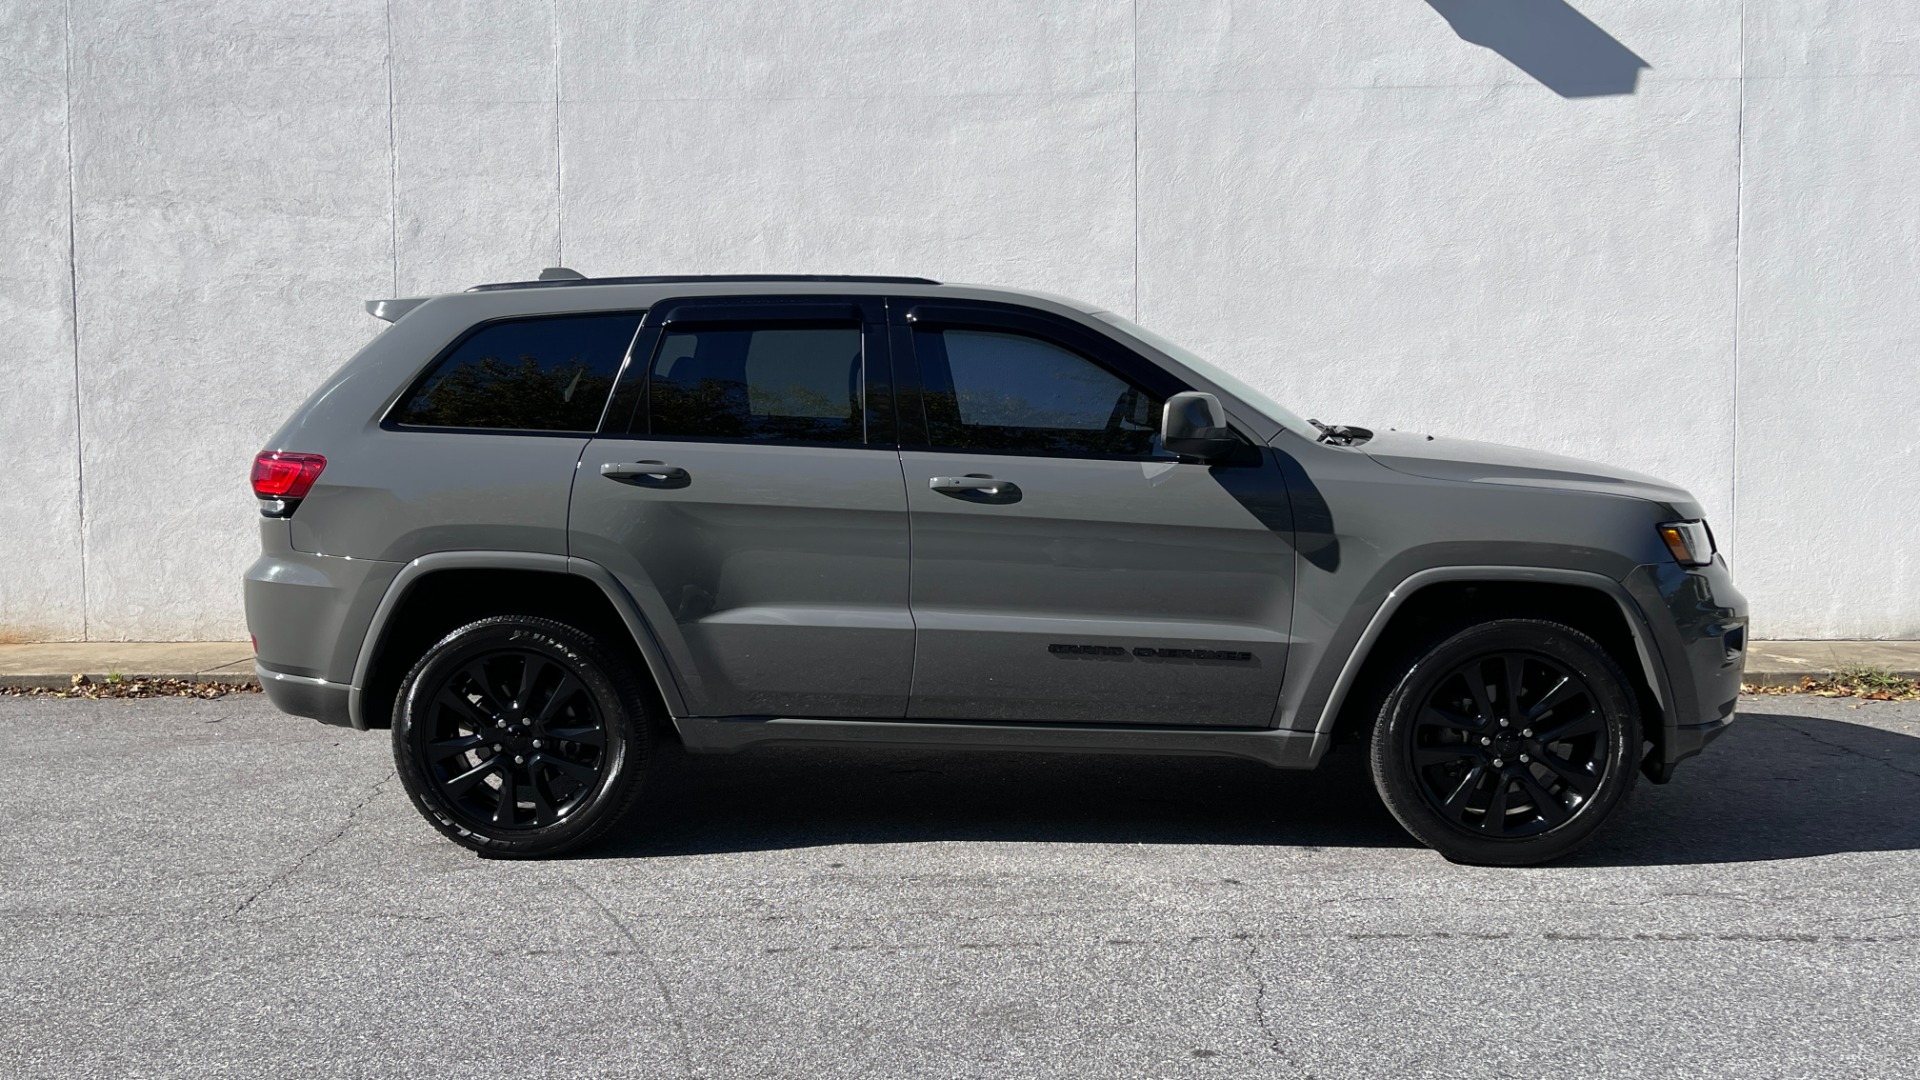 Used 2019 Jeep Grand Cherokee ALTITUDE / BLACK 20IN WHEELS / BLACK TRIM / SUNROOF / HEATED SEATS for sale Sold at Formula Imports in Charlotte NC 28227 3